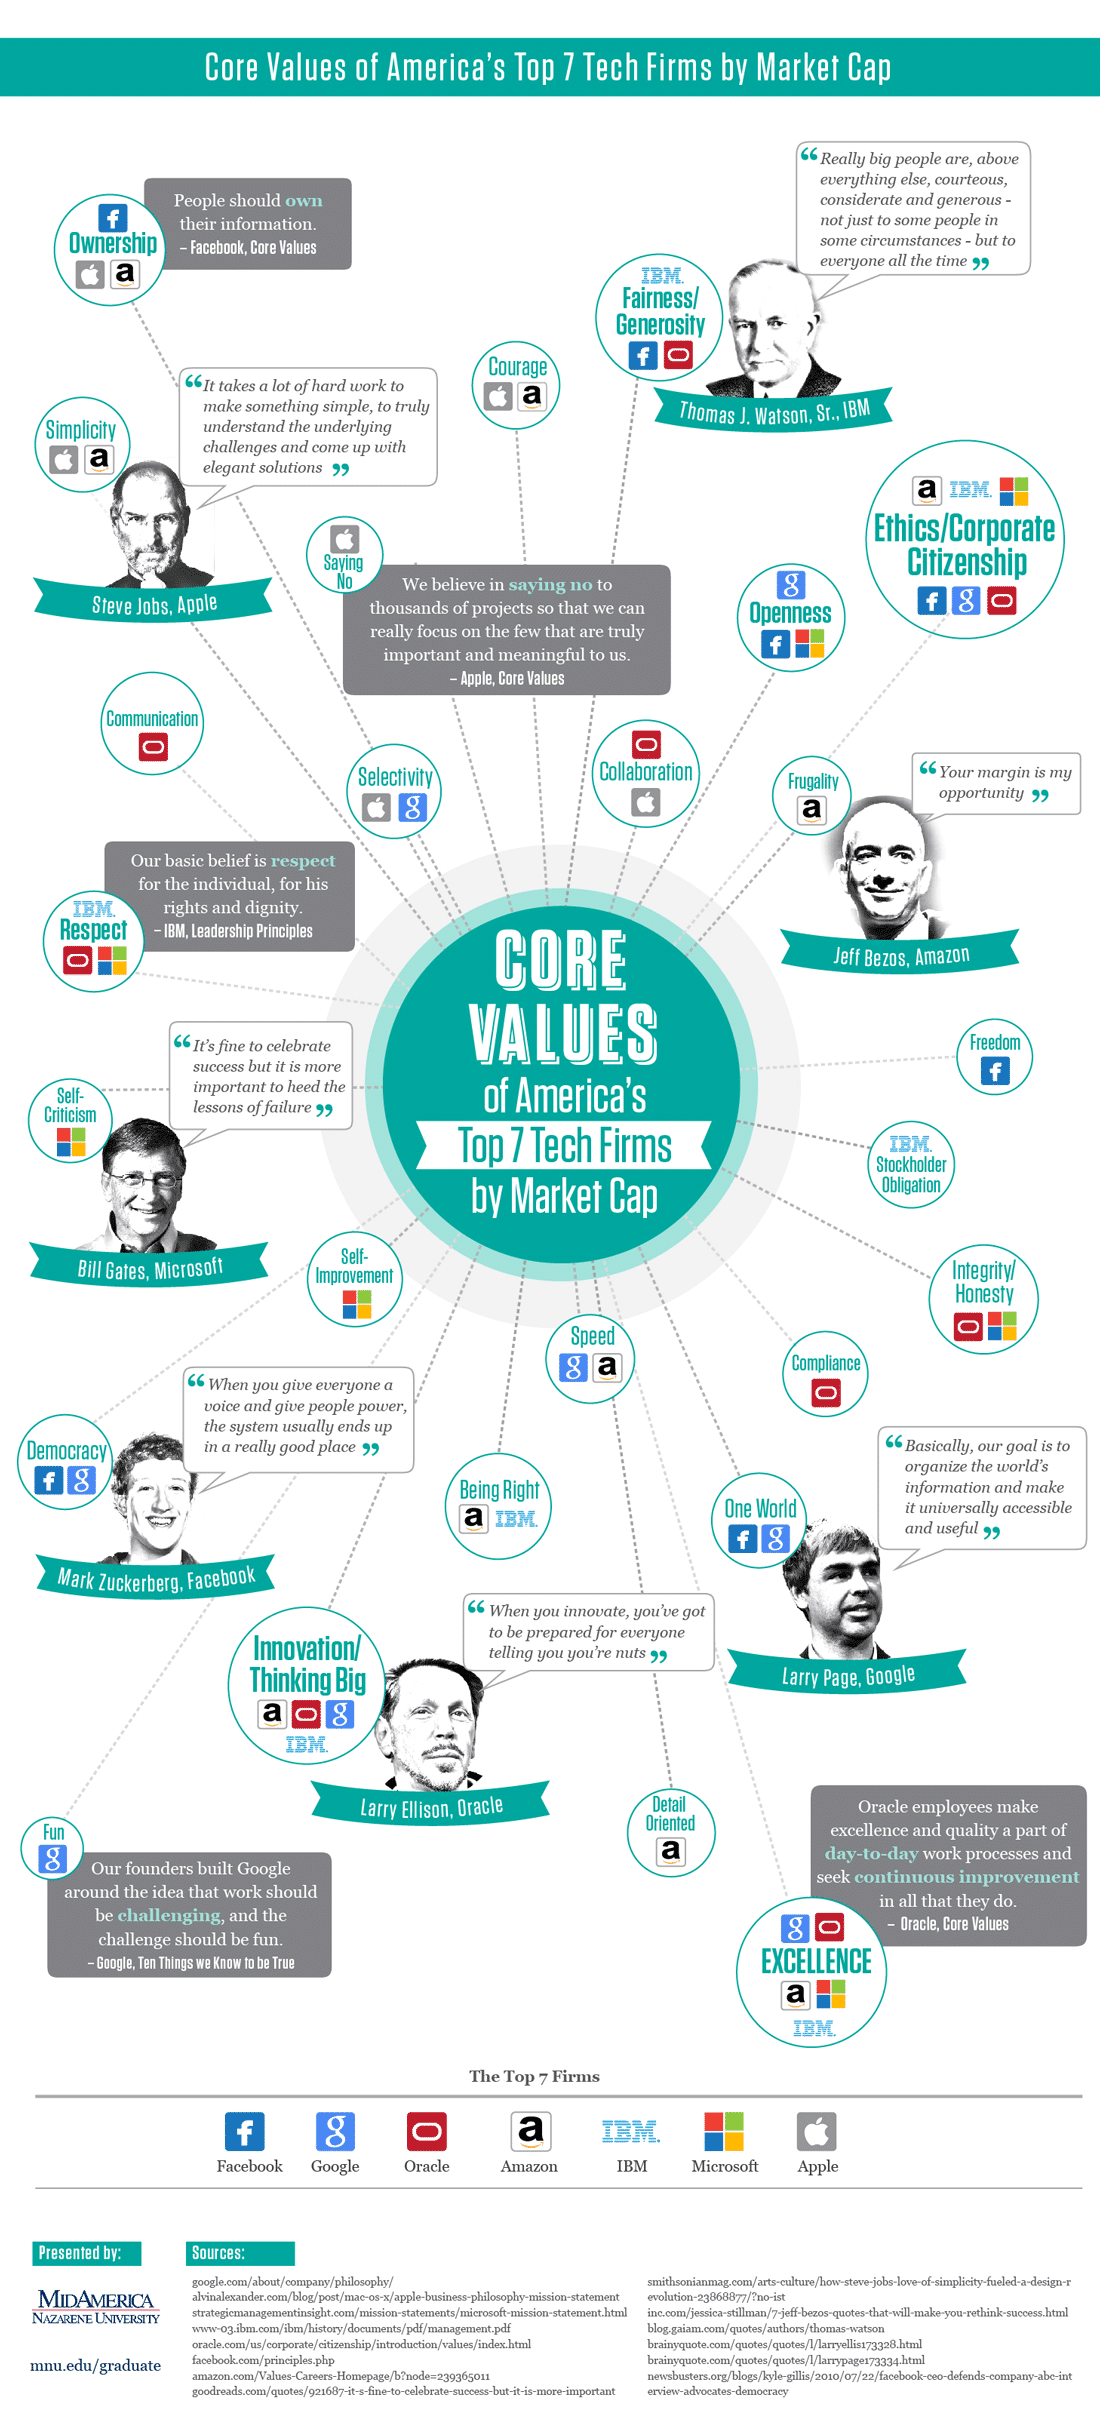 Core Values Of Successful Tech Companies [Infographic]